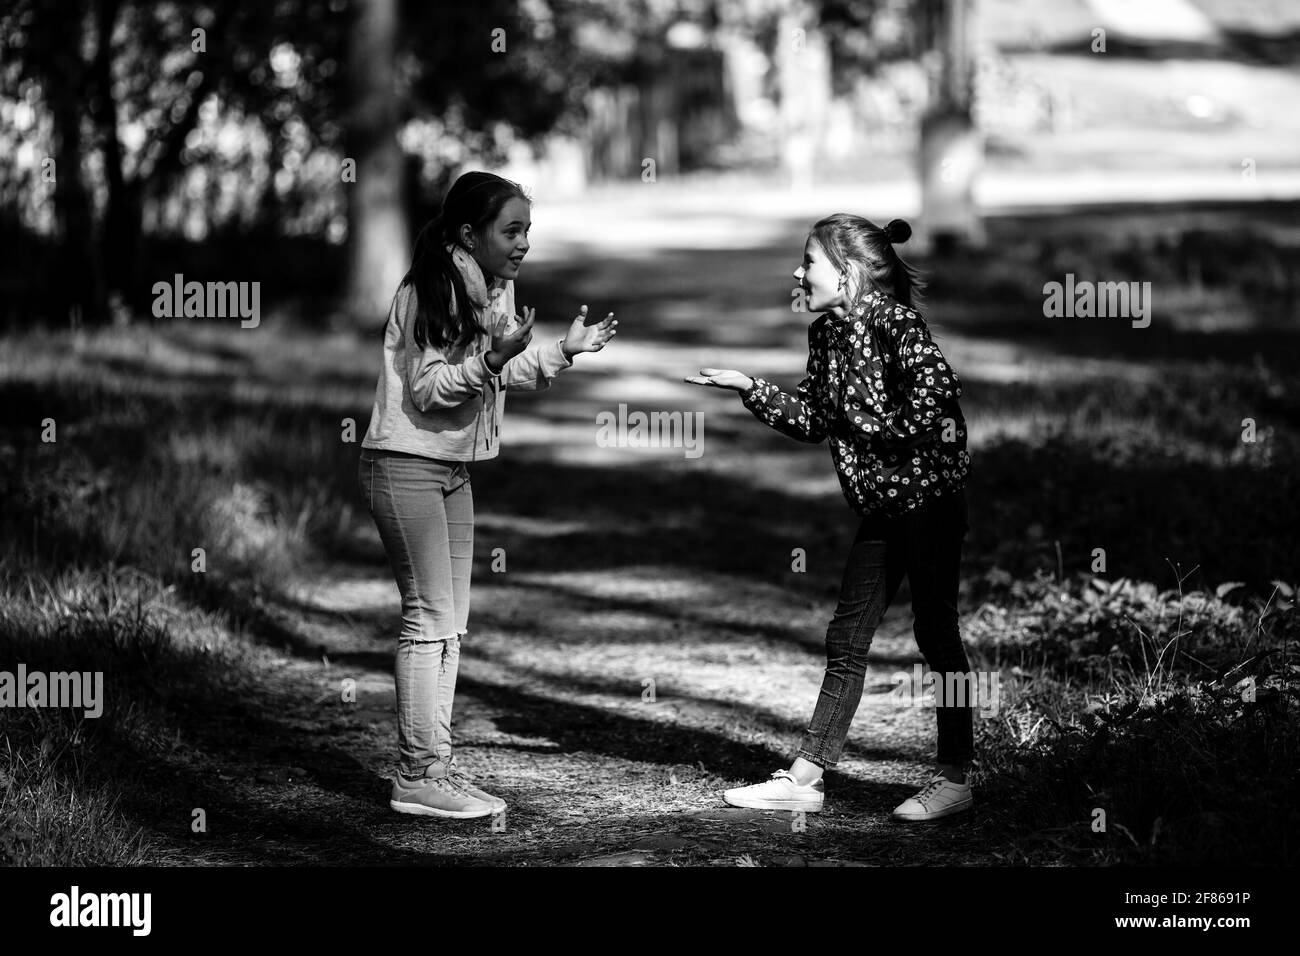 Two girlfriends are talking emotionally outdoors. Black and white photo. Stock Photo